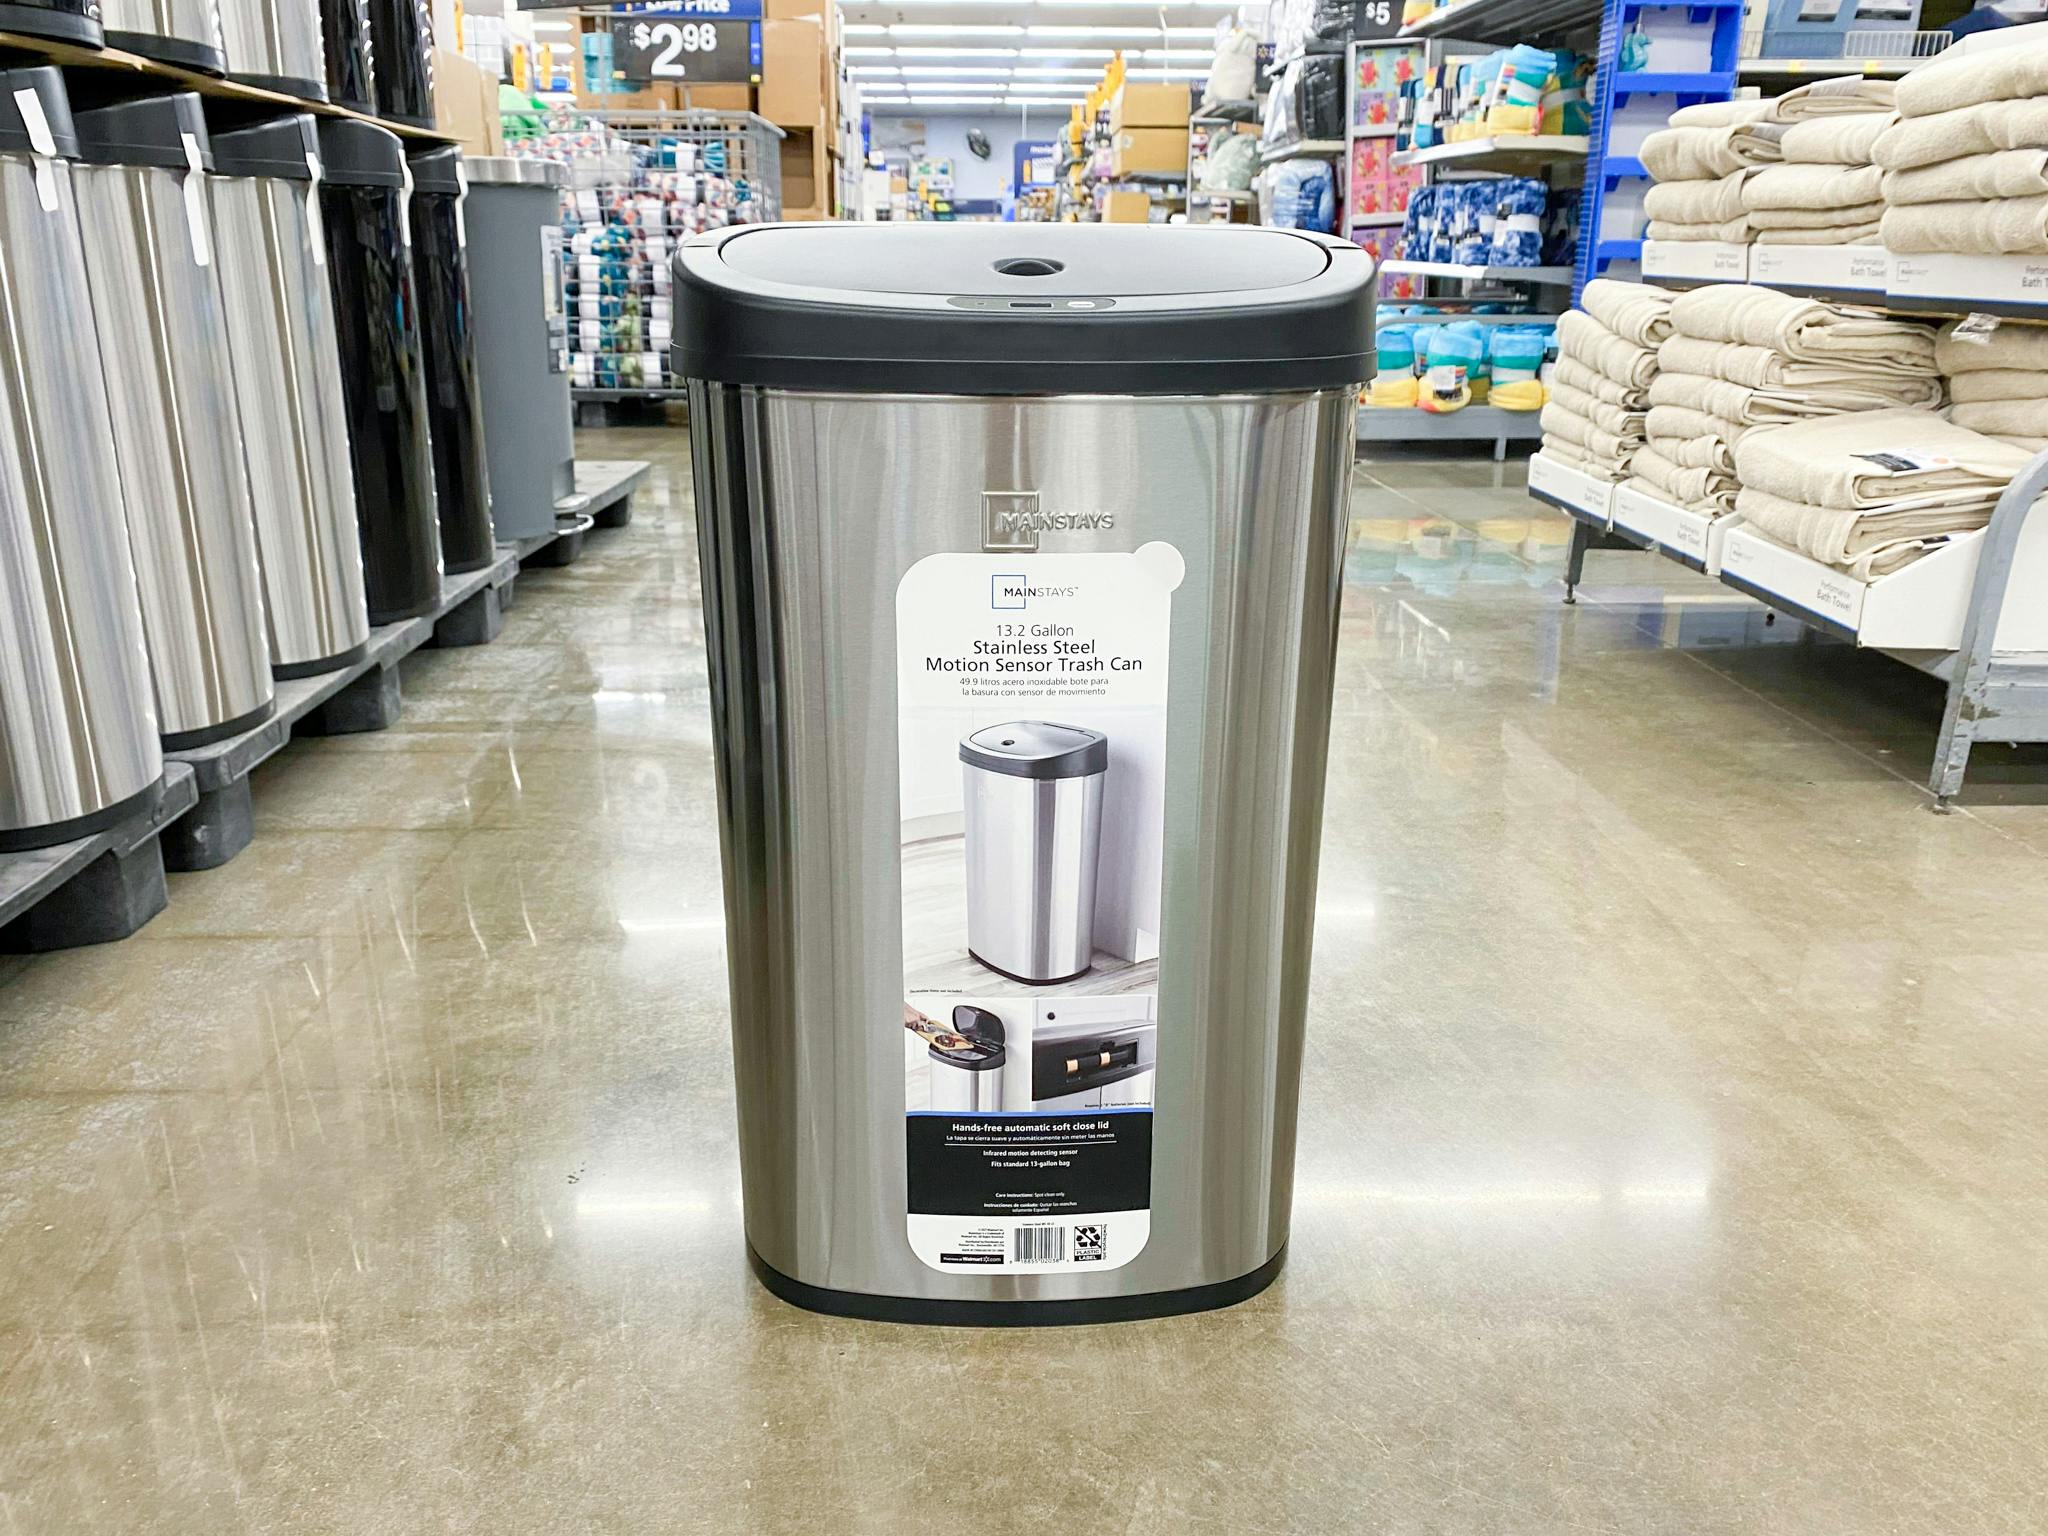 Walmart Mainstays Motion Sensor Garbage Can 2022 3 1661262518 1661262518 ?auto=compress,format&fit=max